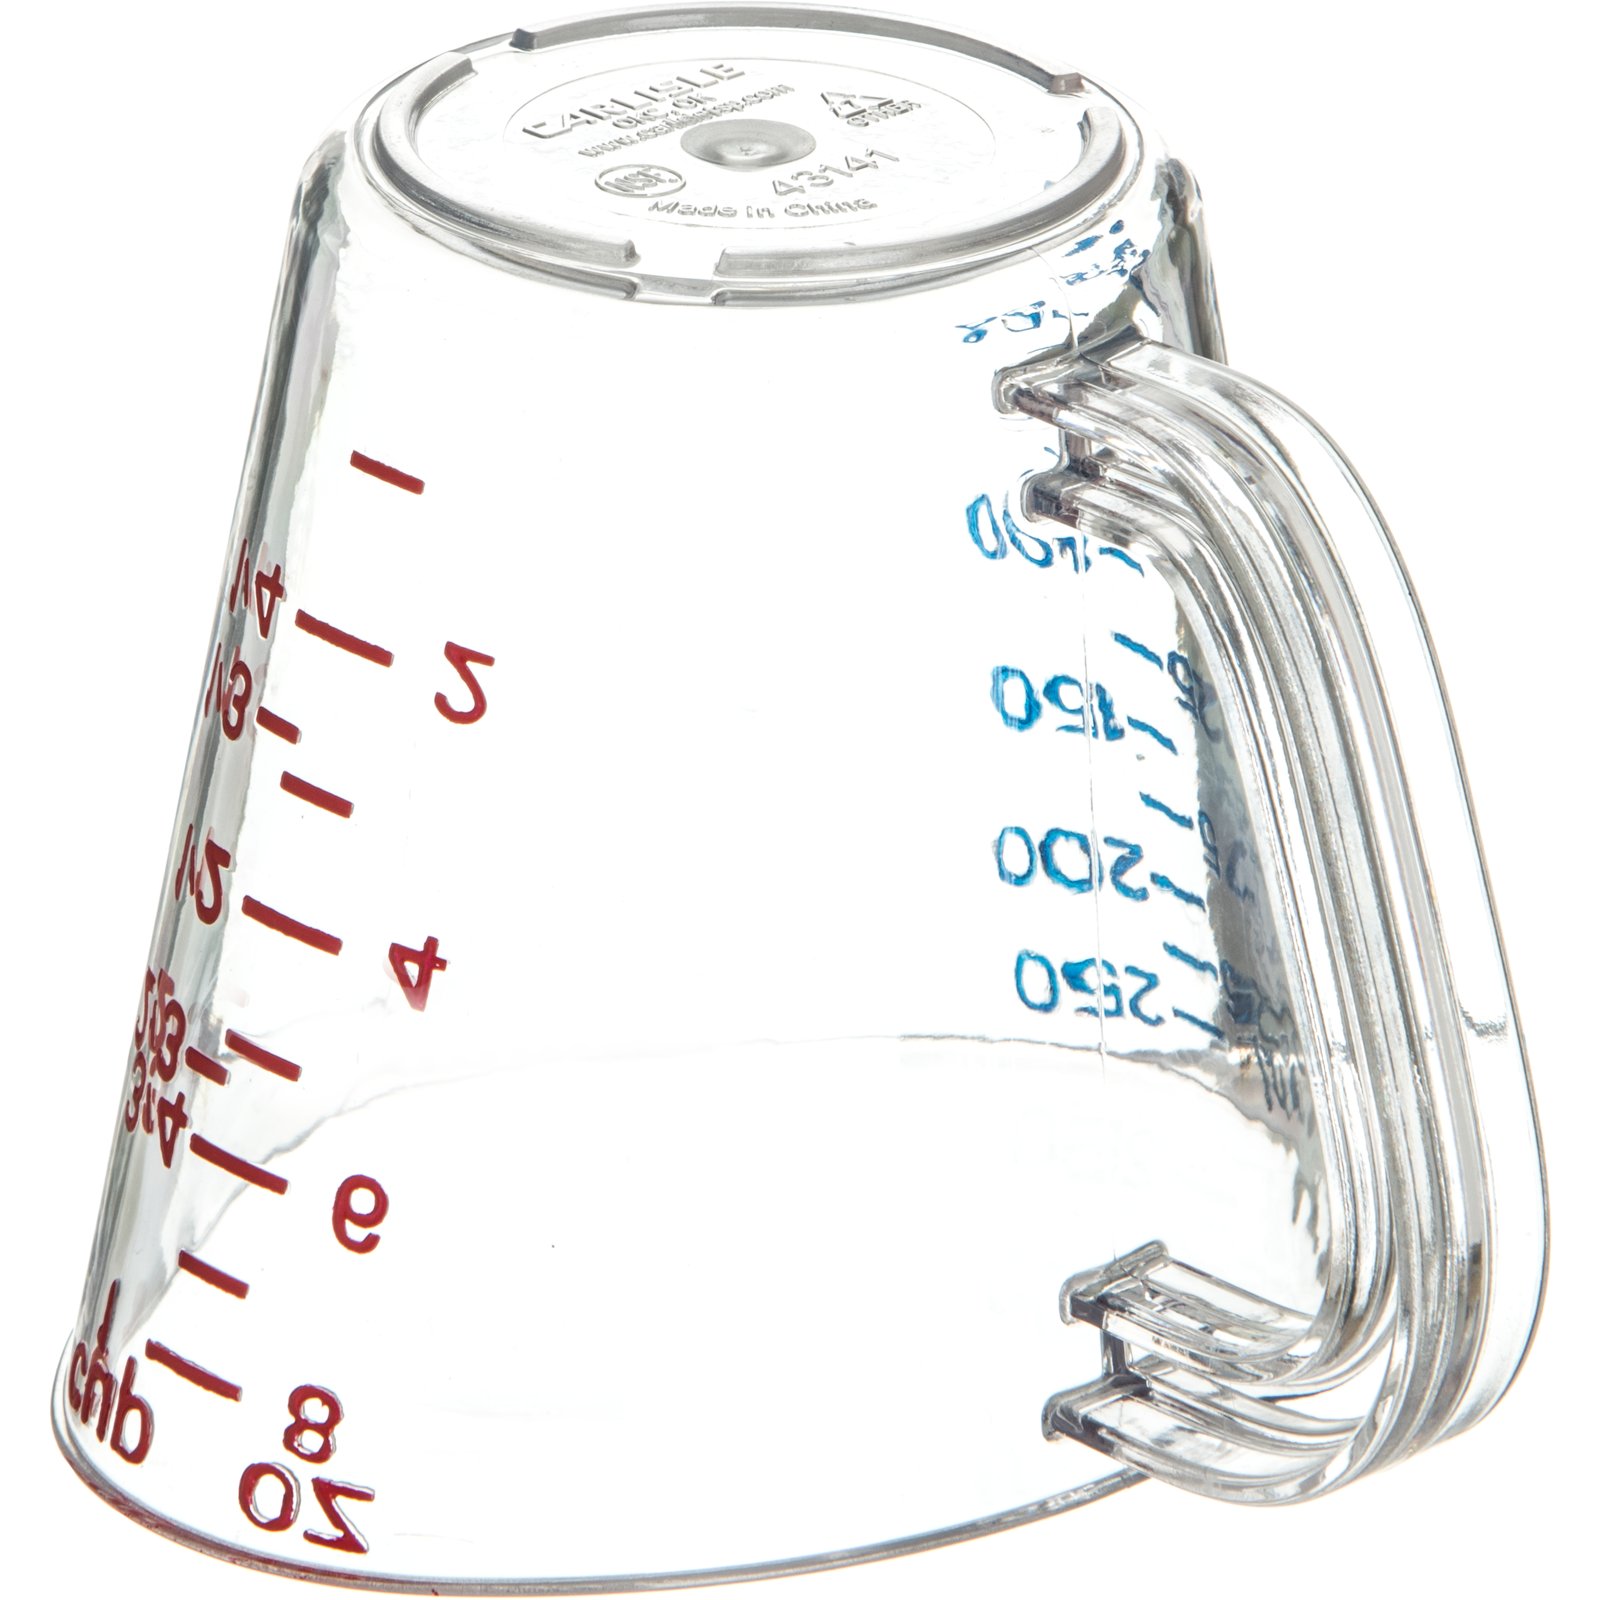 Carlisle 4314407 64 oz. Measuring Cup - Ford Hotel Supply